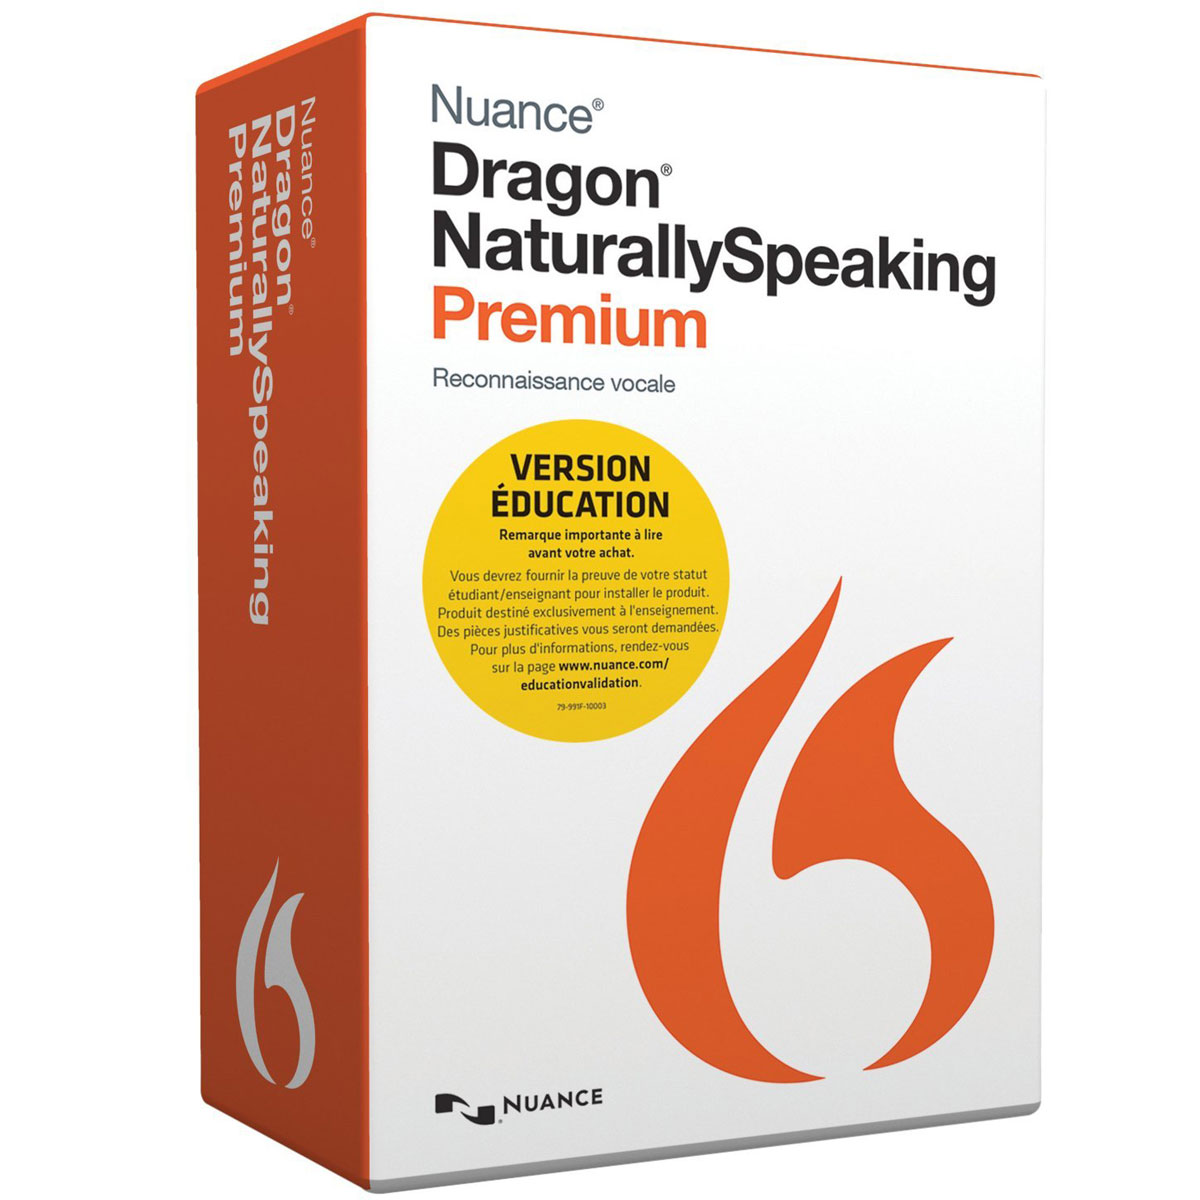 nuance dragon for mac